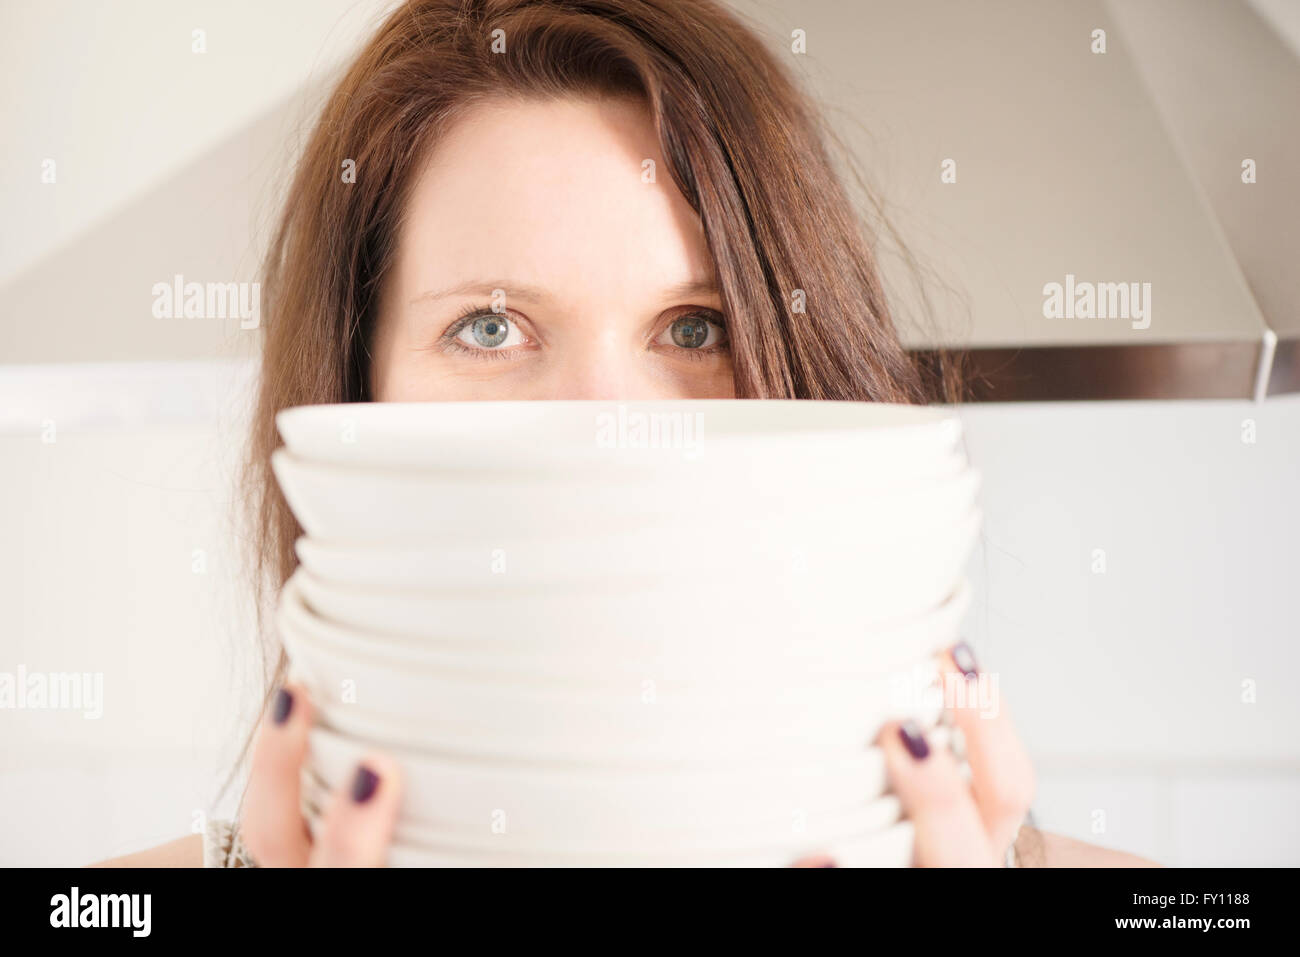 Portrait of woman in kitchen holding a stack of plates. Lifestyle image of young woman. Concept of dinner or party preparation. Stock Photo